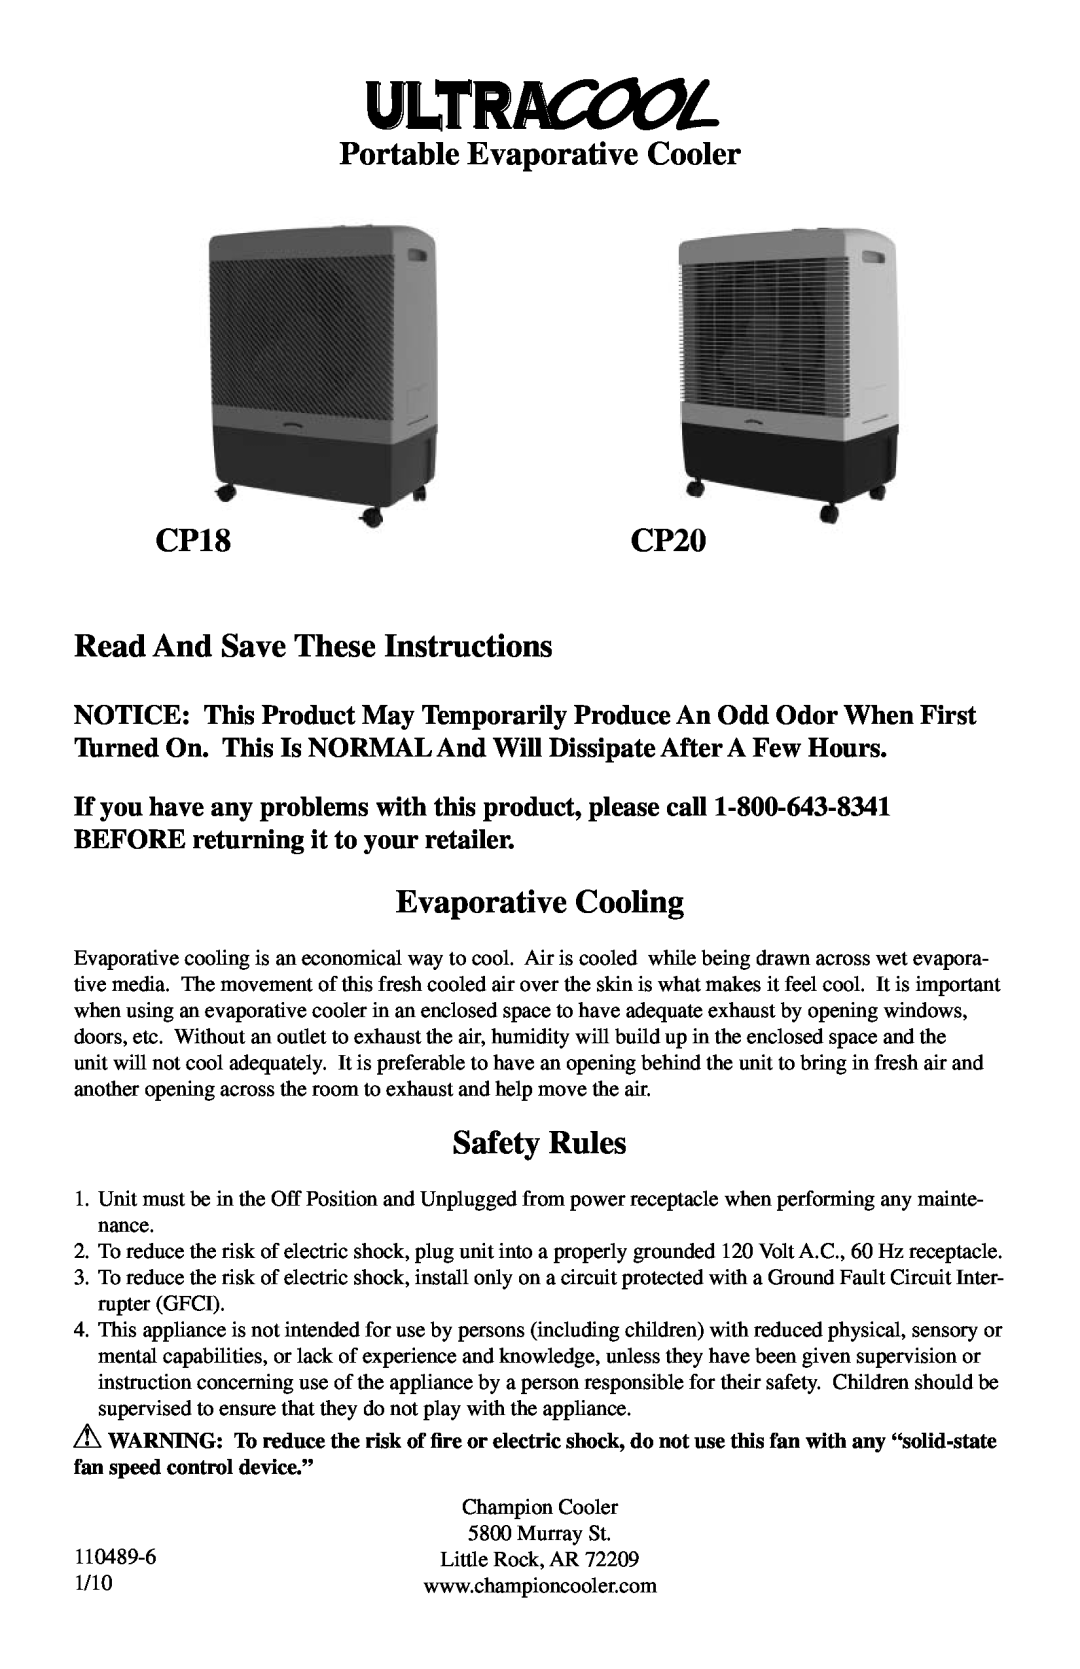 Essick Air manual Portable Evaporative Cooler CP18CP20, Read And Save These Instructions, Evaporative Cooling 